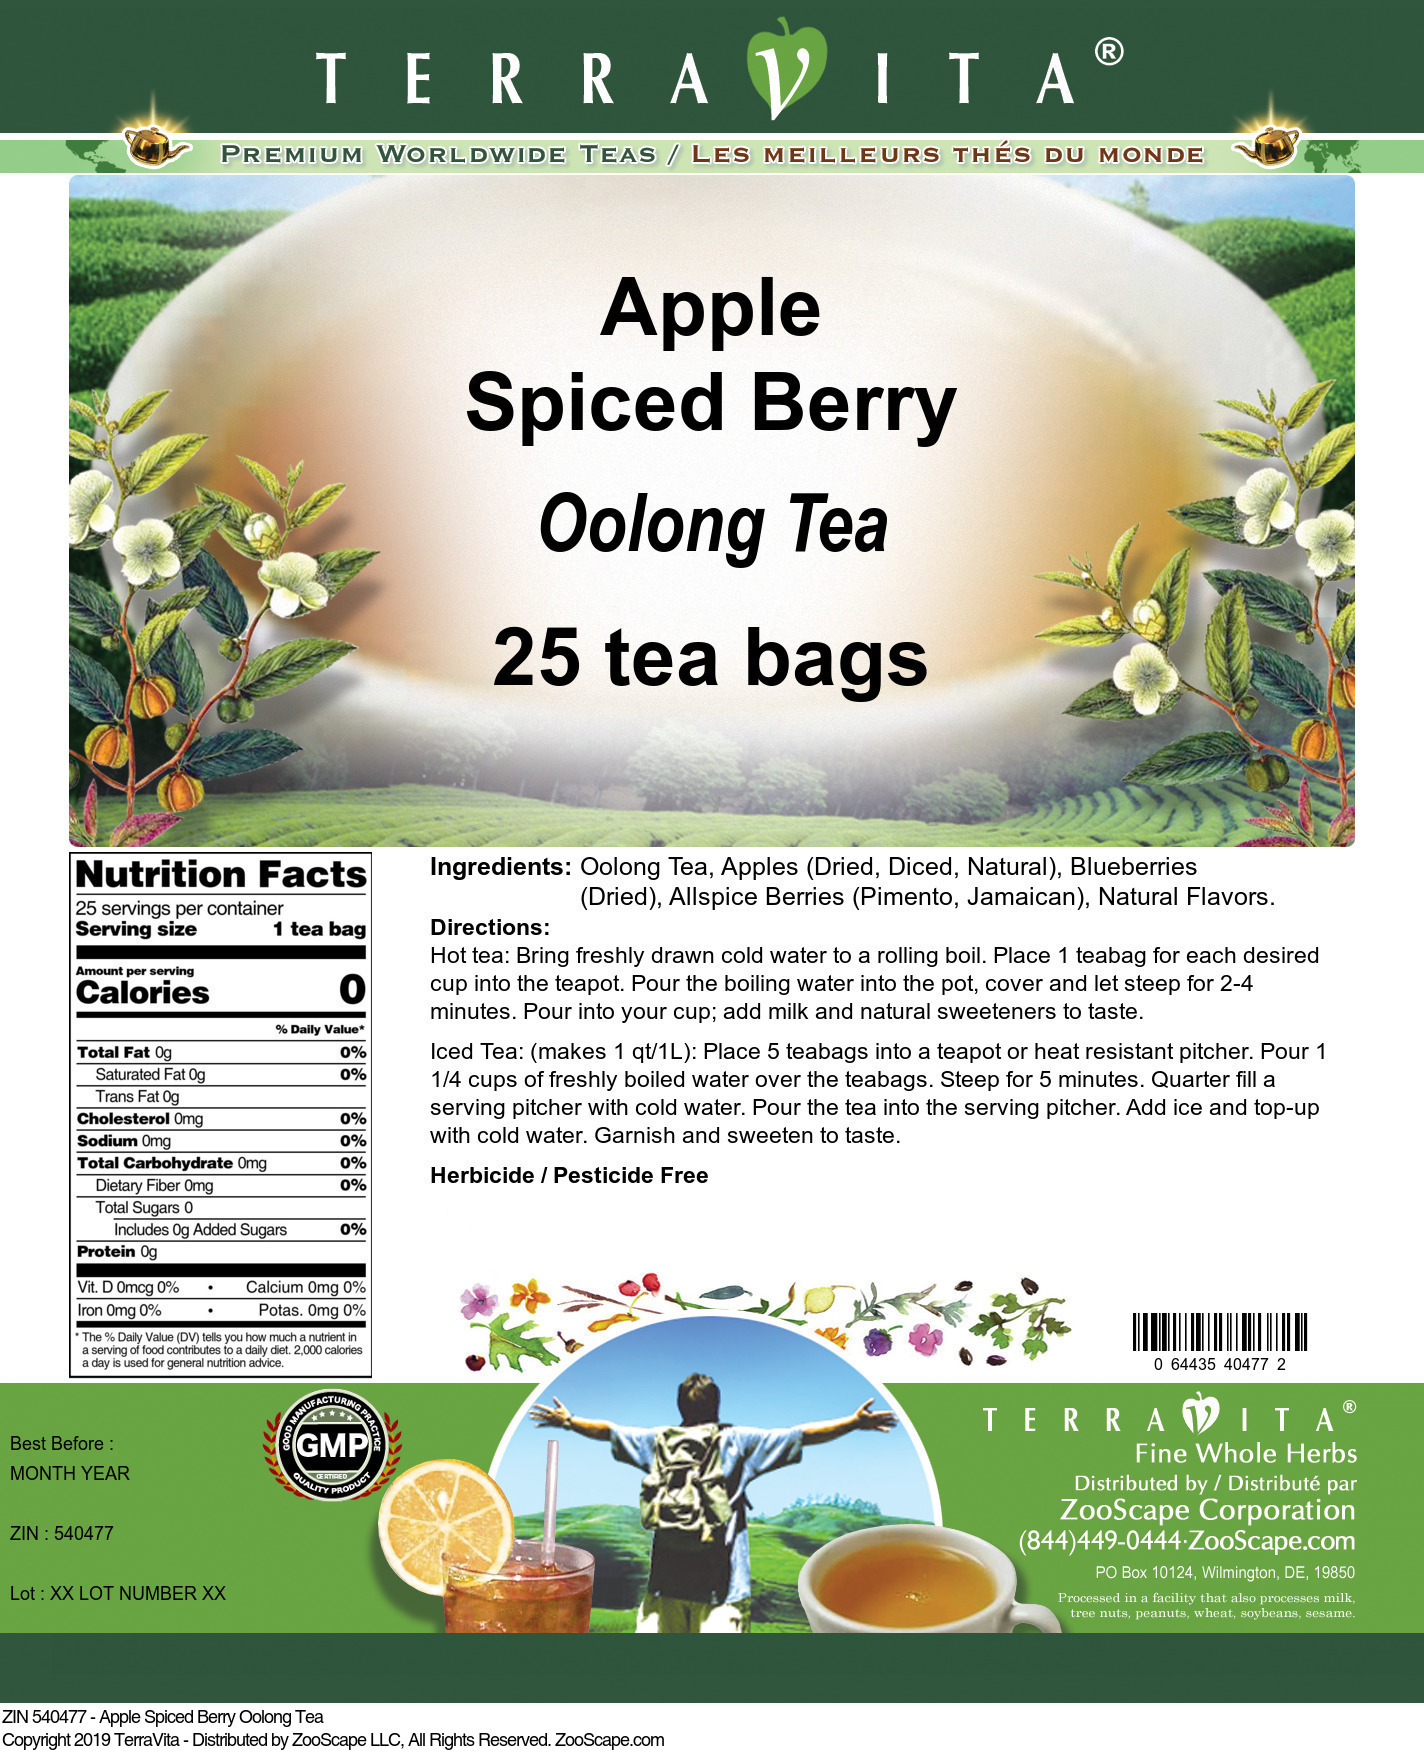 Apple Spiced Berry Oolong Tea - Label